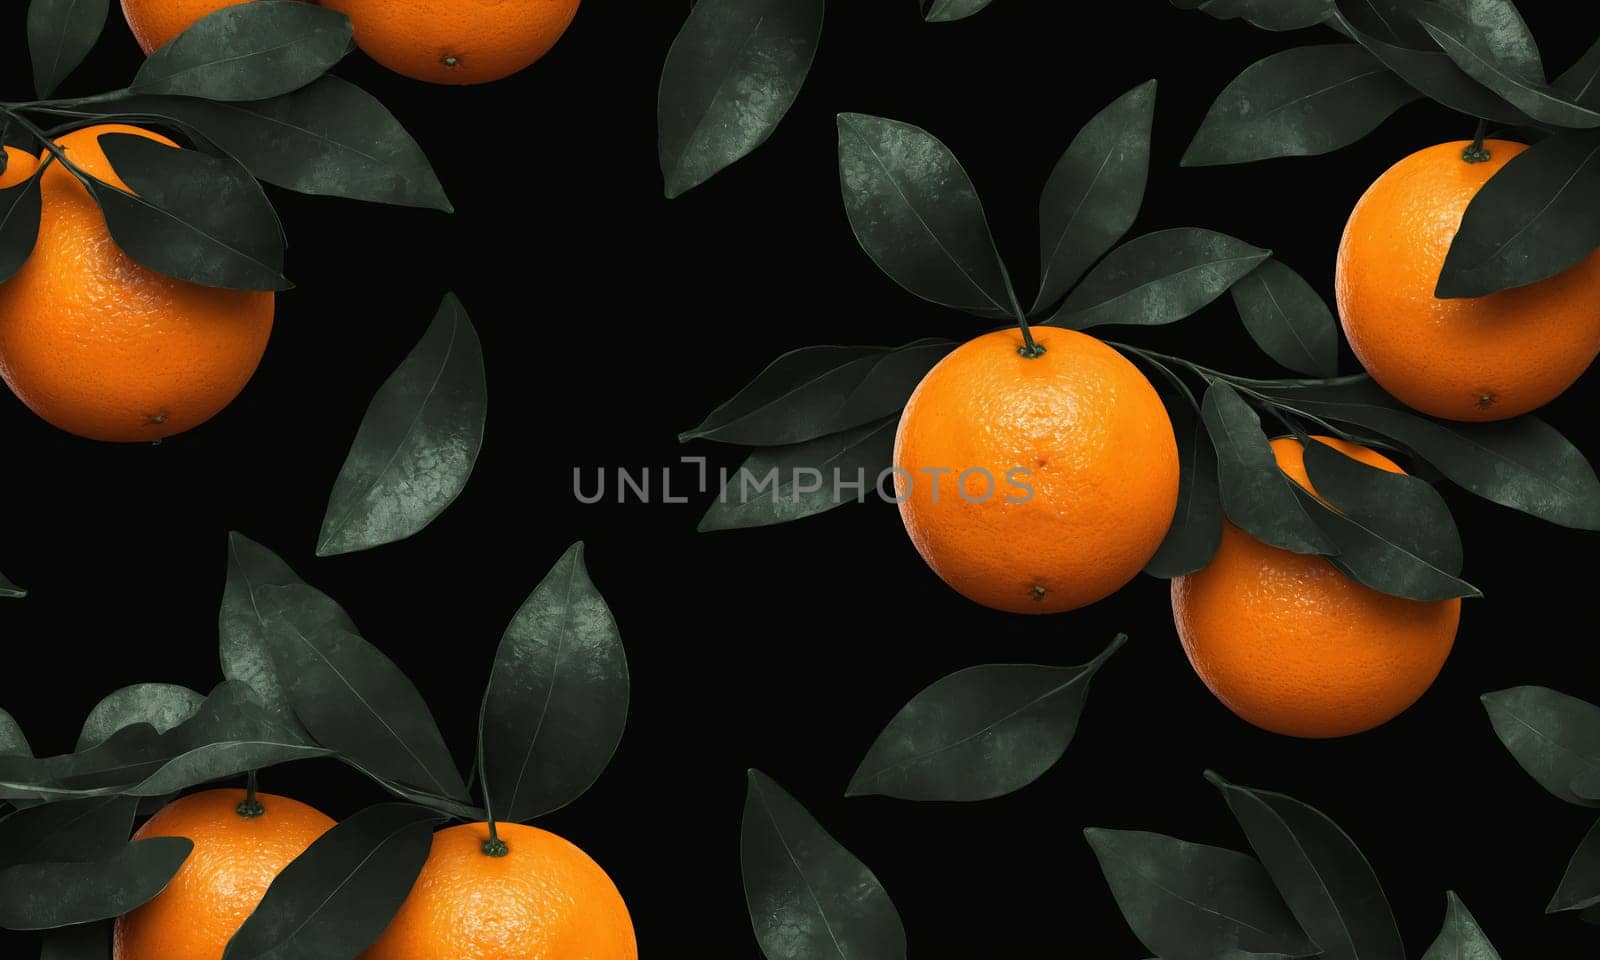 A seamless pattern featuring oranges with green leaves on a black background. This design showcases various citrus fruits like Rangpur, Valencia orange, and Tangelo